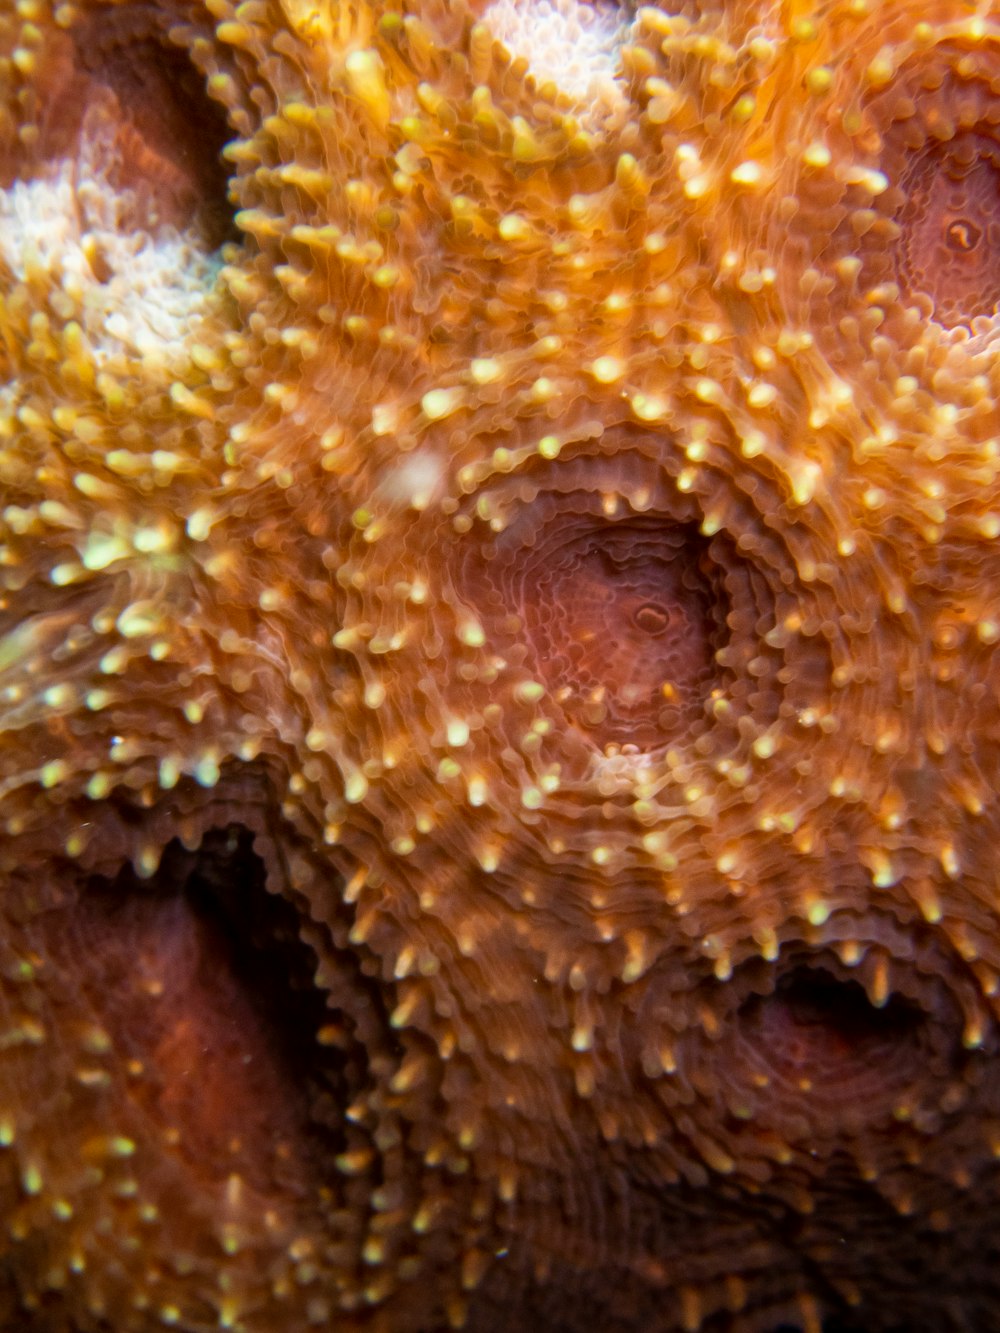 a close up of a coral with small yellow dots